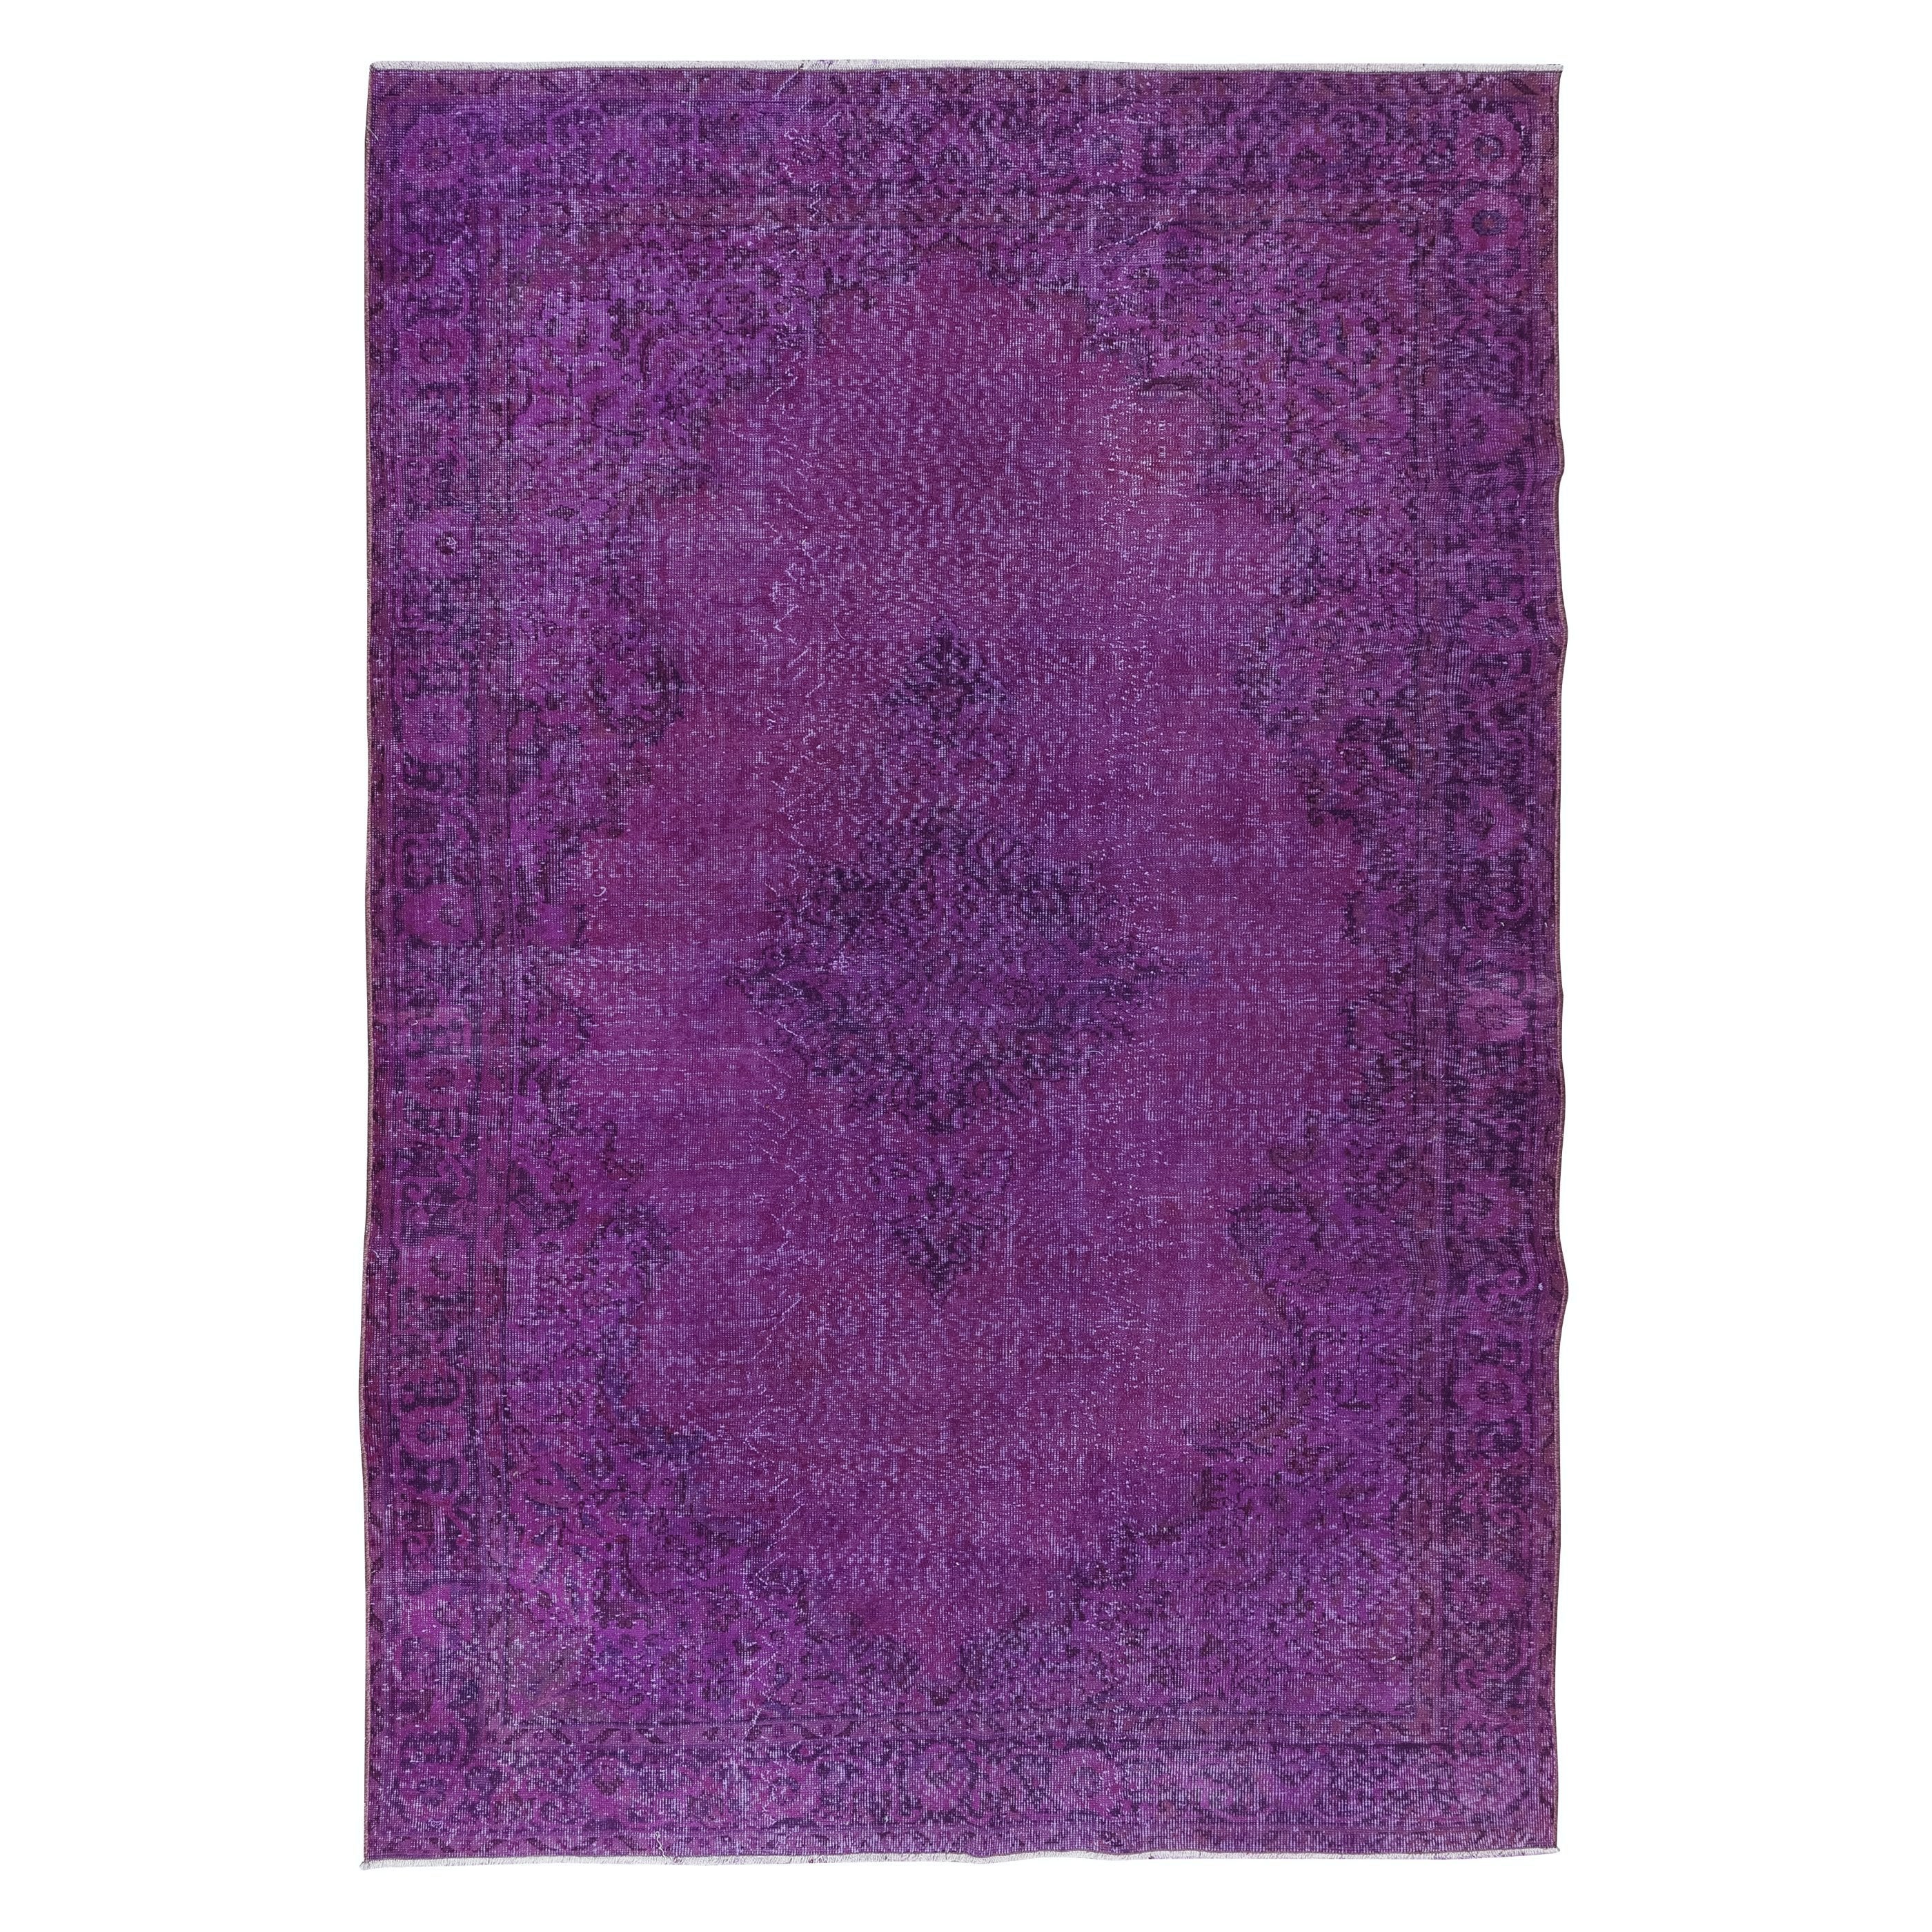 7x10 Ft Handmade Turkish Purple Area Rug, Ideal for Modern Interiors For Sale